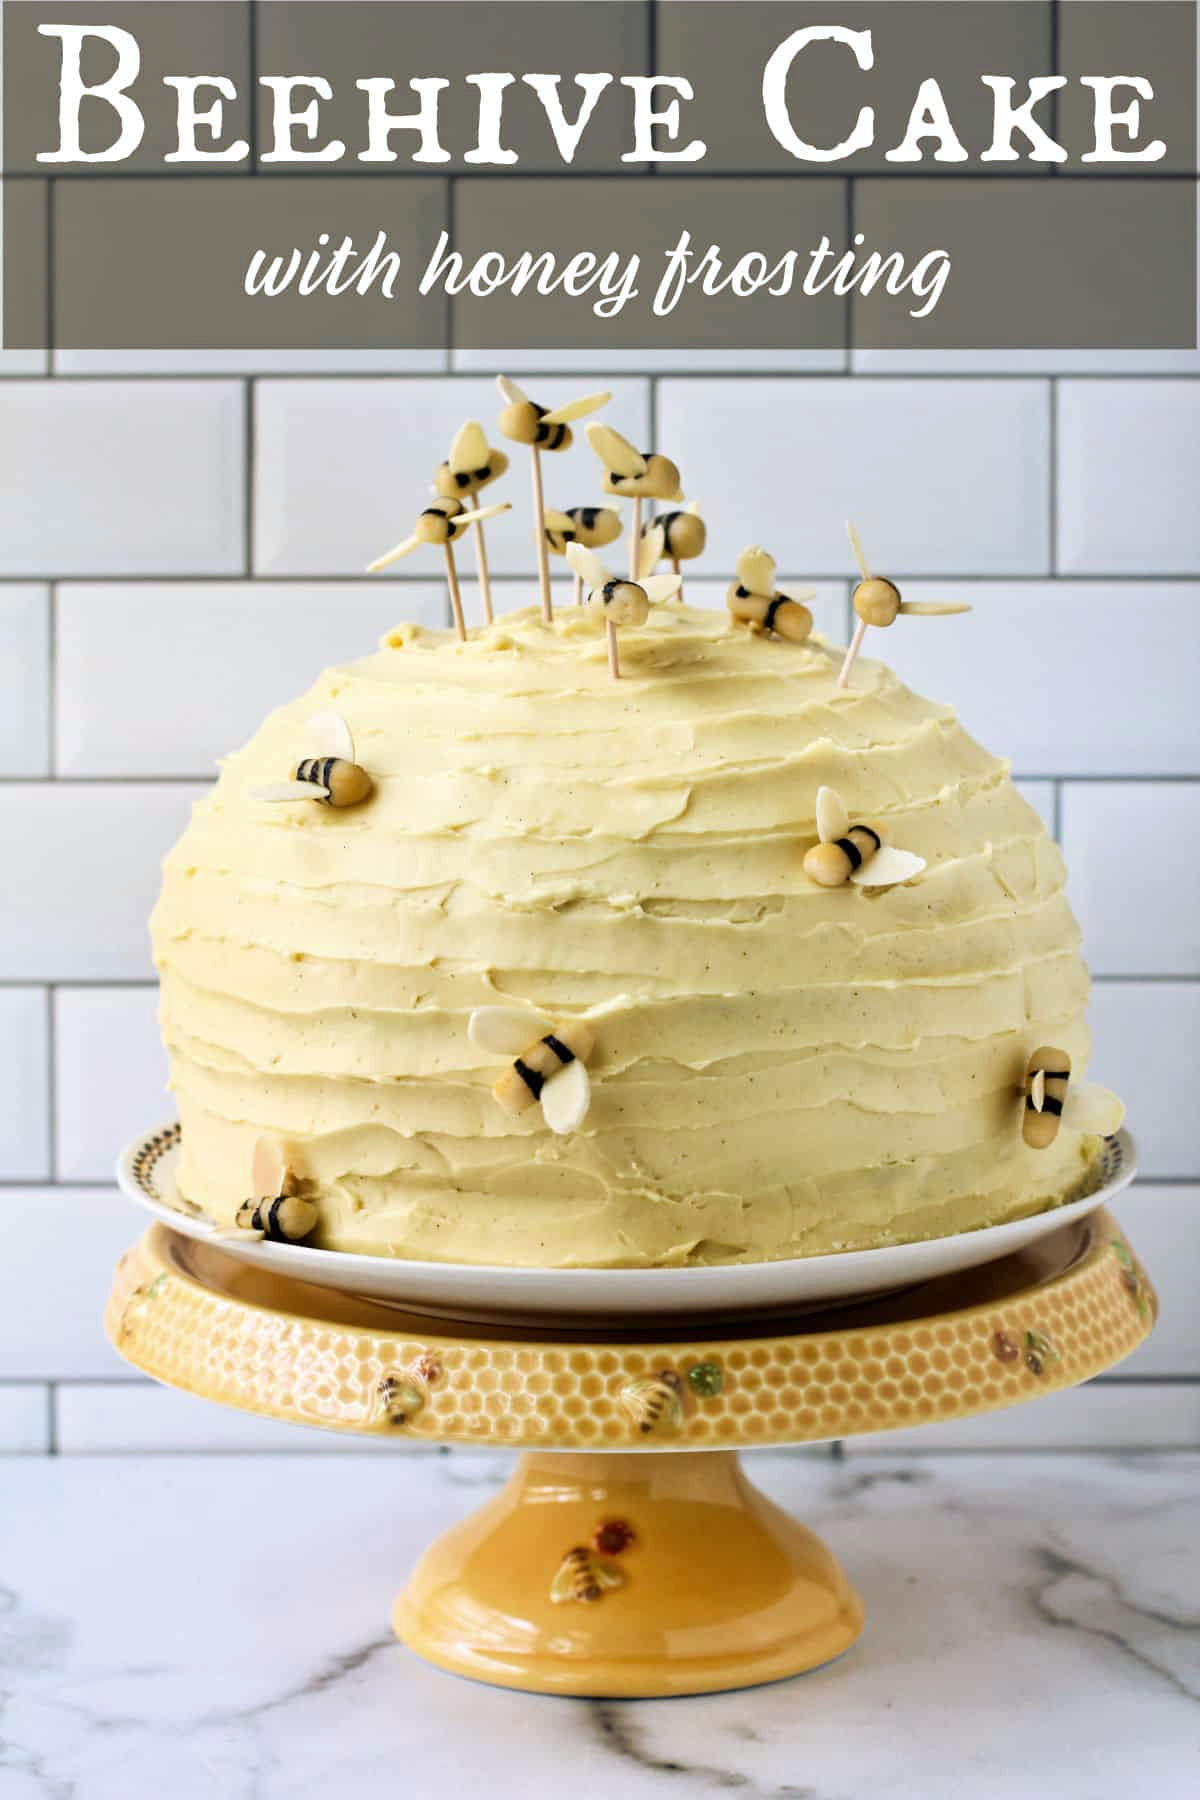 Beehive Cake with marzipan bees on a cake stand.